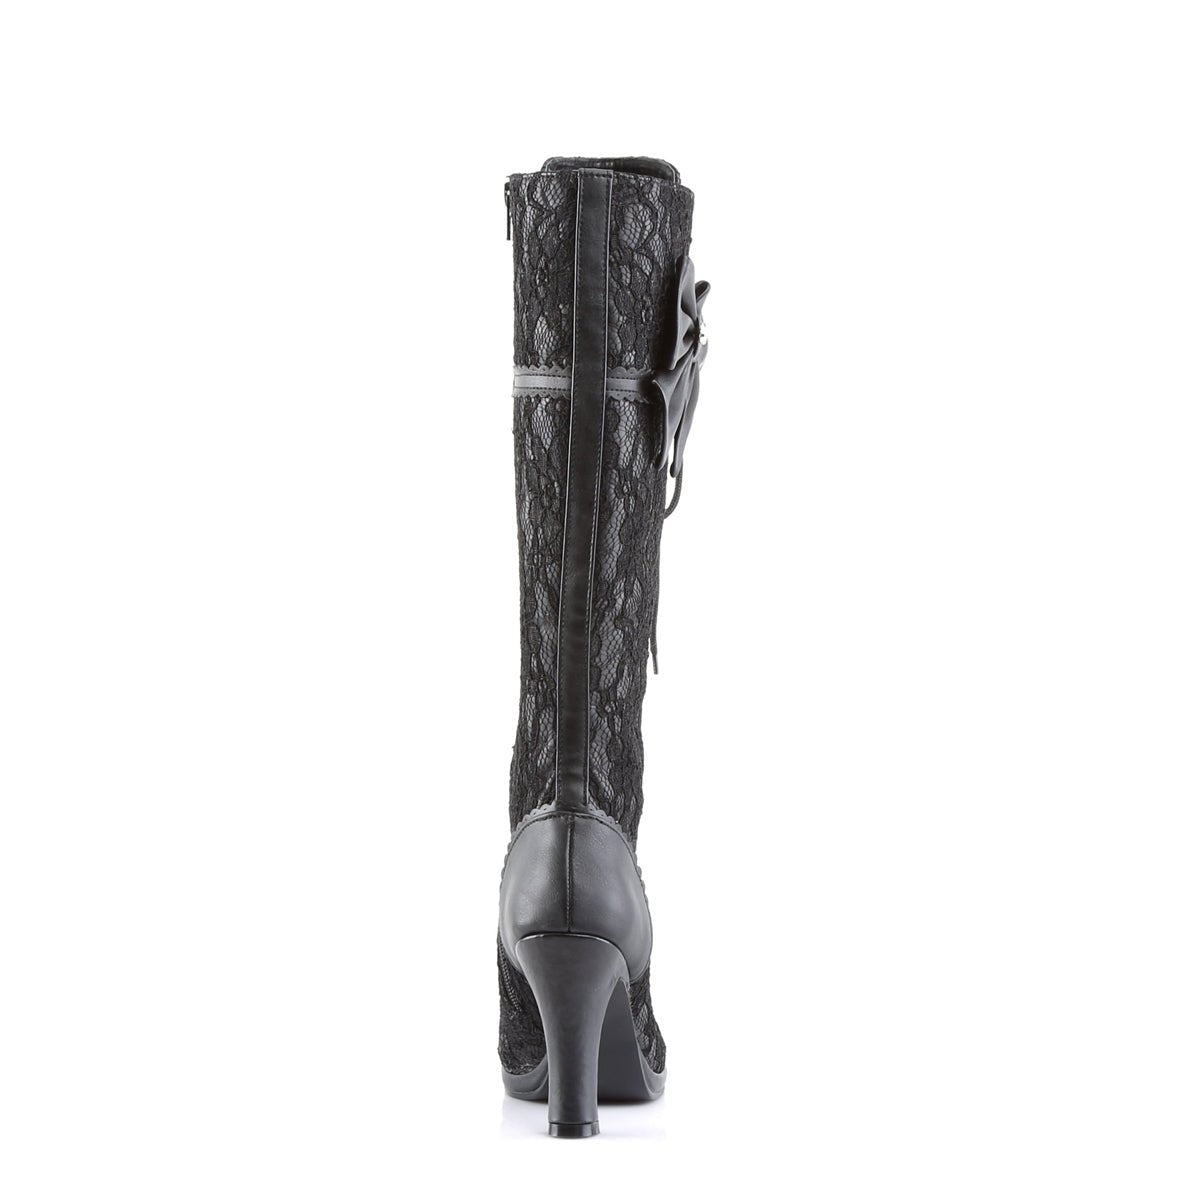 Too Fast | Demonia Glam 240 | Black Vegan Leather With A Lace Overlay Women's Knee High Boots